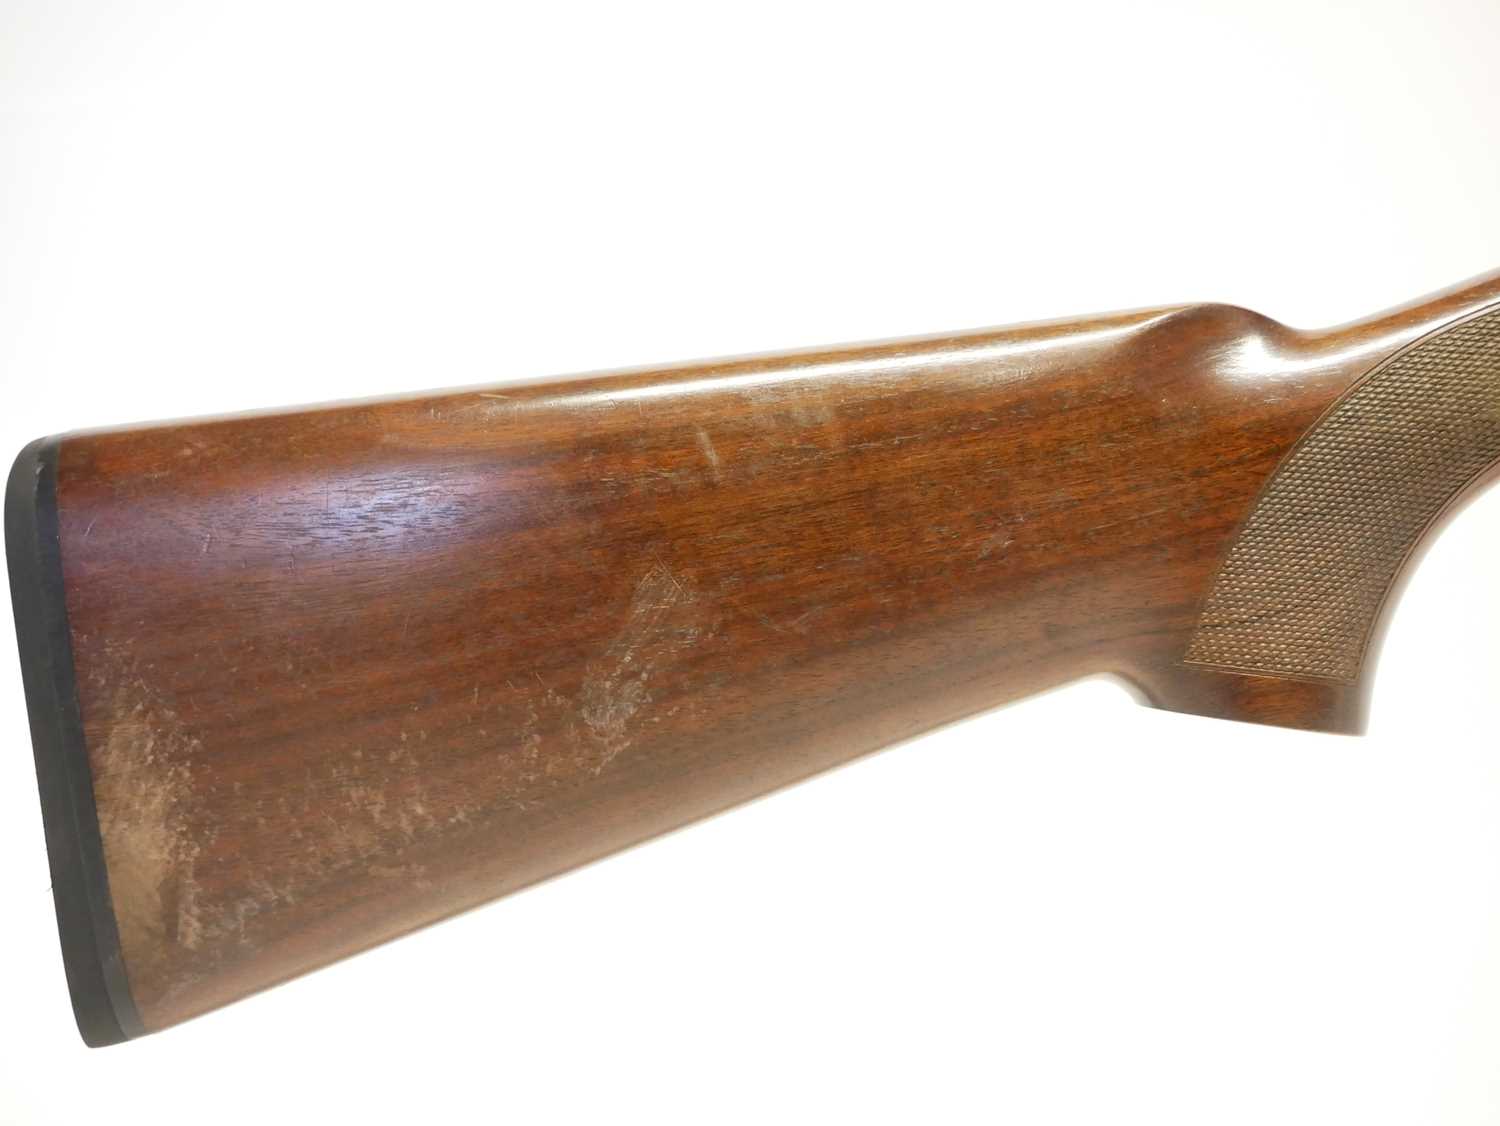 Yildiz 20 bore over and under shotgun, 30 inch barrels, (only two choke tubes present, no key) - Image 3 of 10